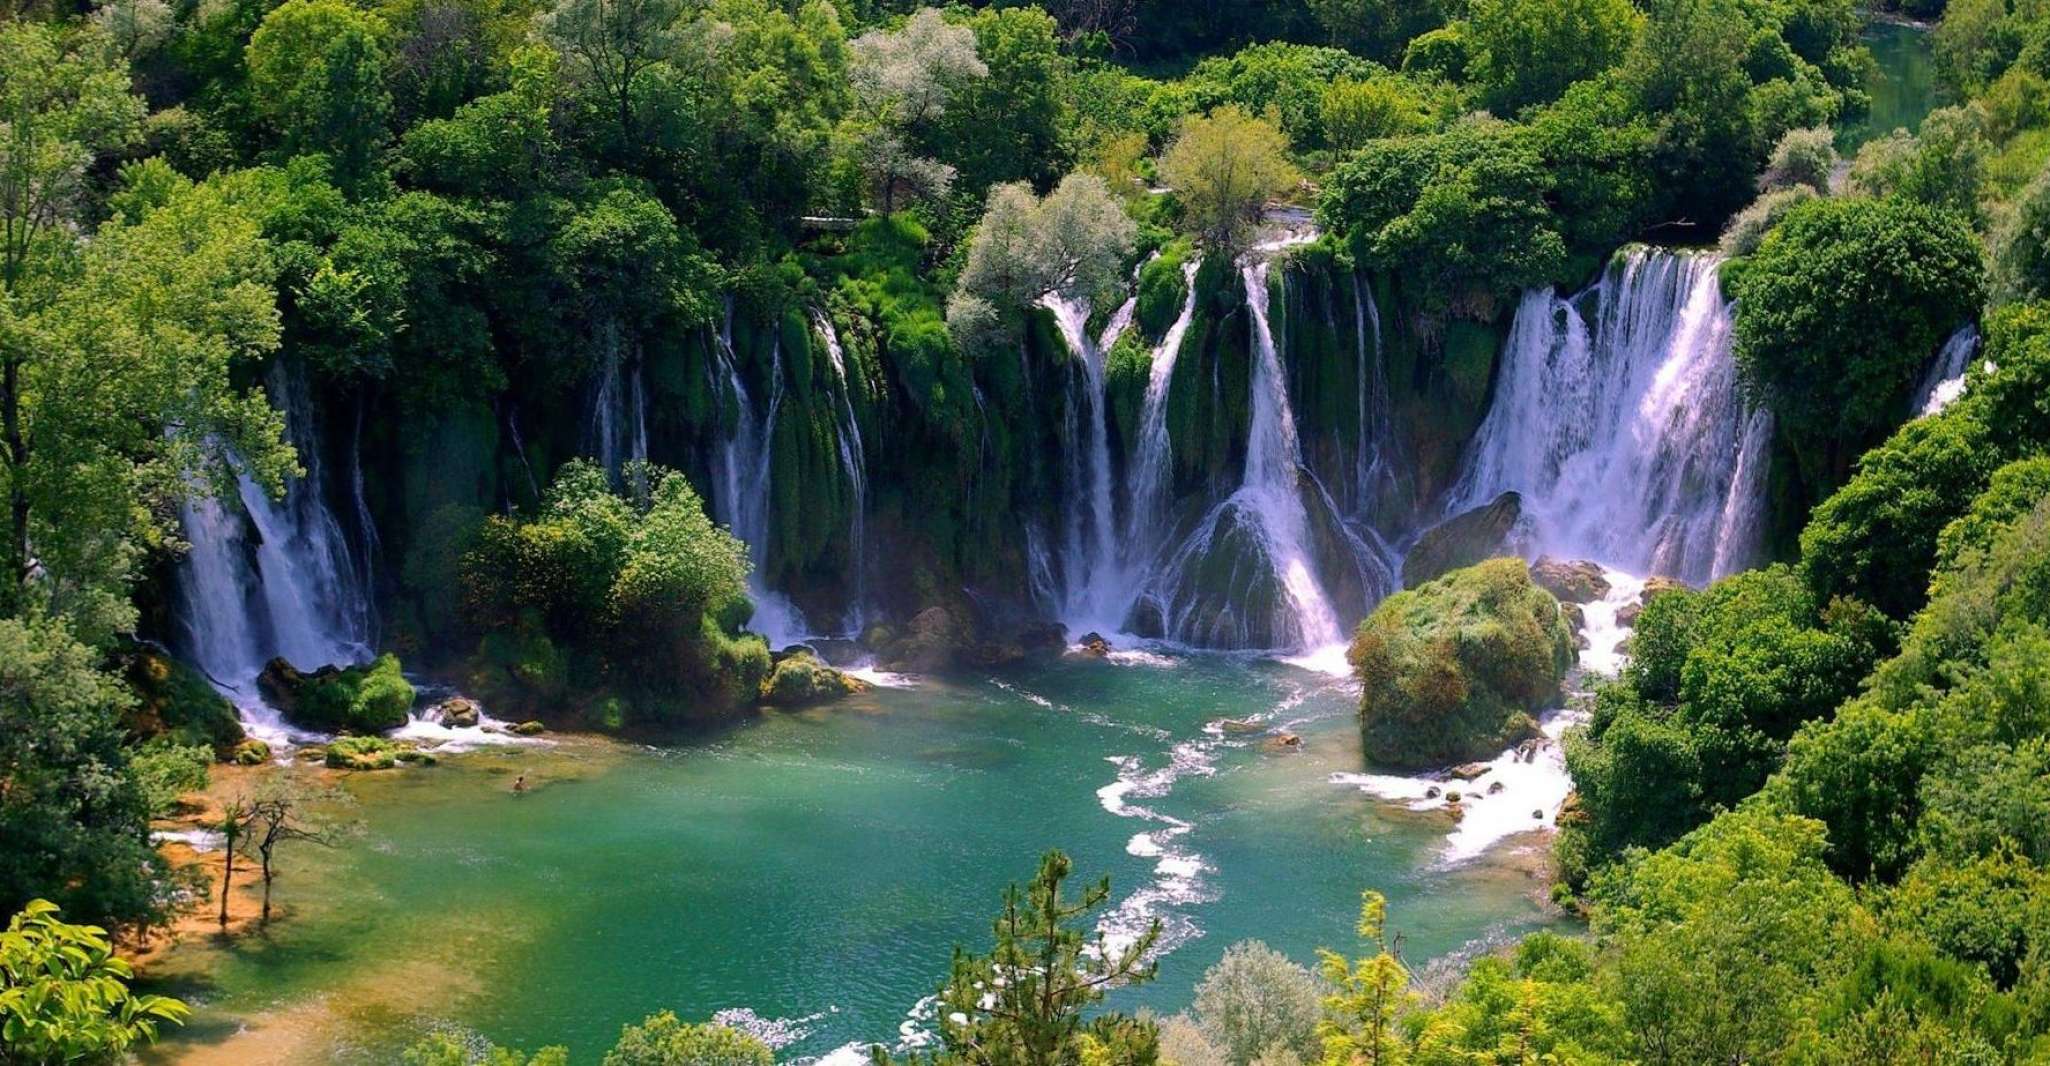 Mostar & Kravica Waterfall, Small Group Tour from Dubrovnik - Housity